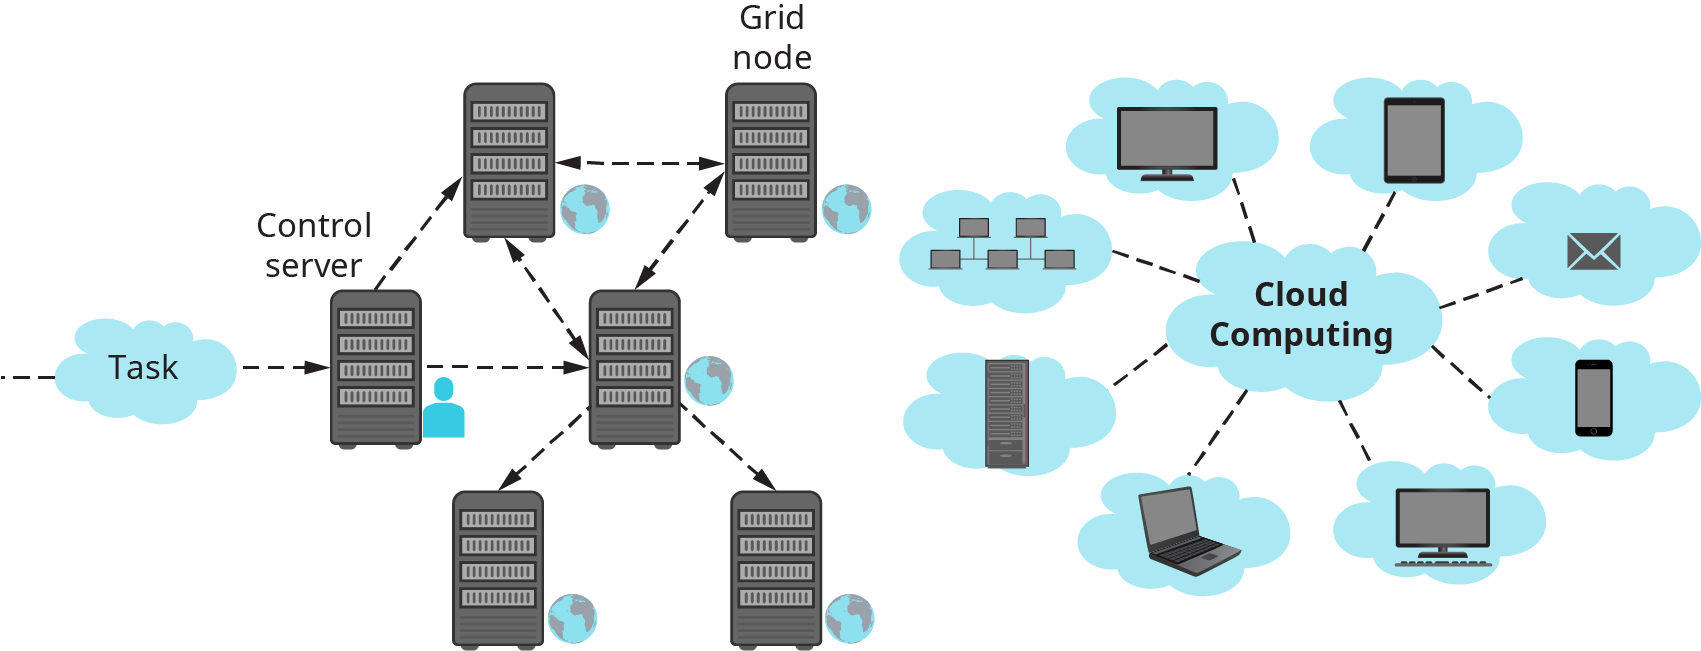 In grid computing, a task is sent to a control server, then bounced back and forth between servers around the globe. With cloud computing, multiple devices, such as laptops, cell phones, networks, all connect to a single cloud source.